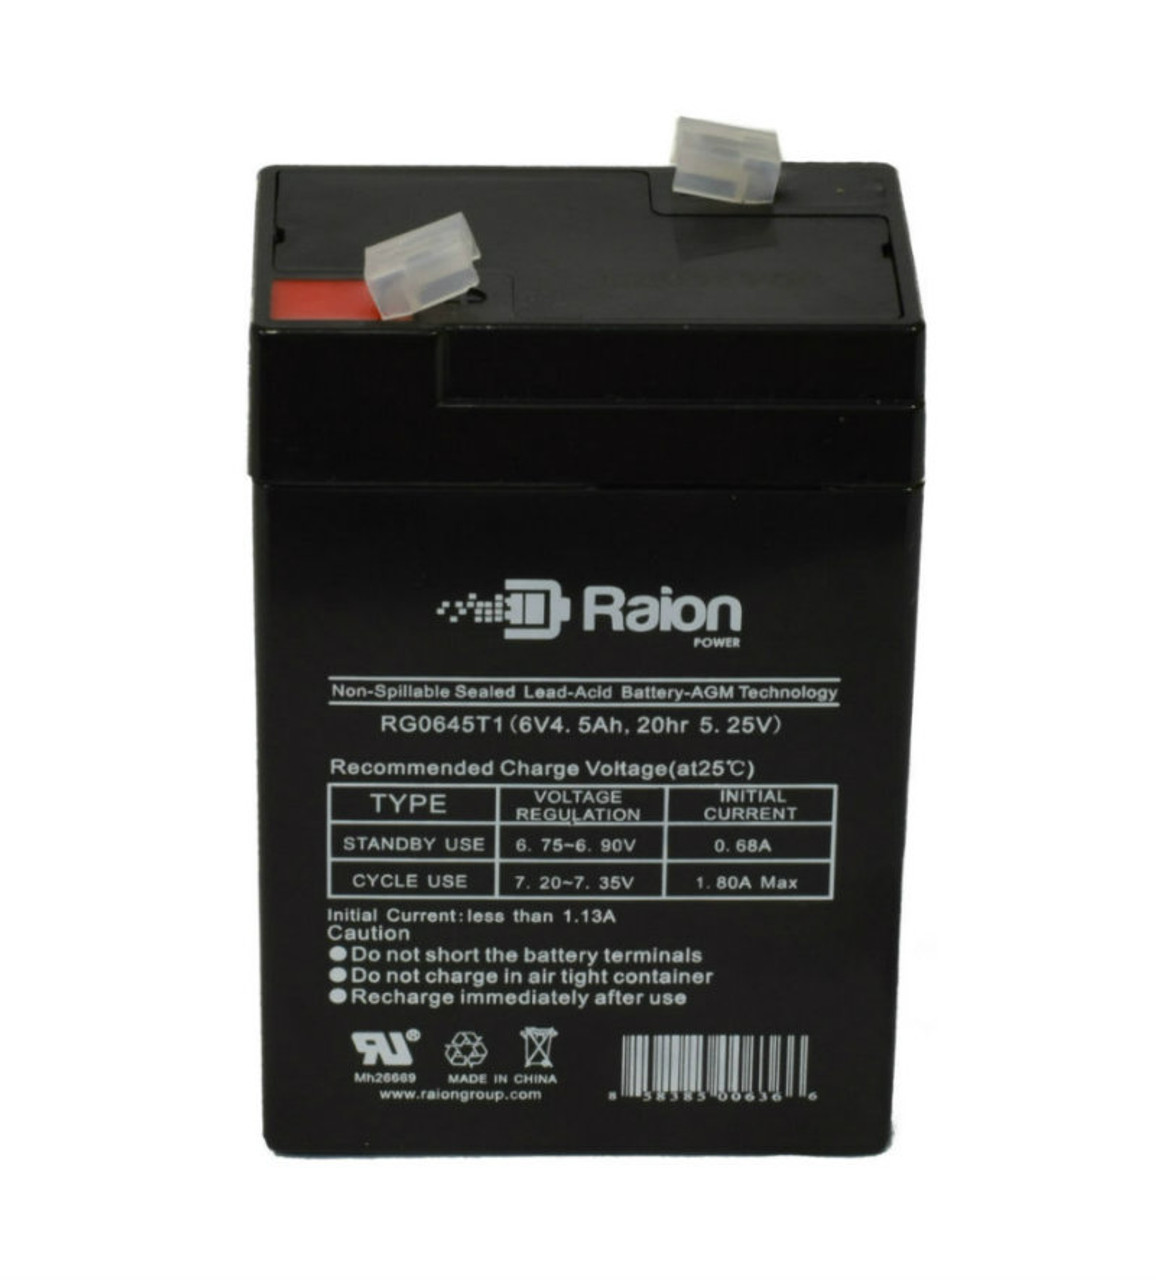 Raion Power RG0645T1 Replacement Battery Cartridge for Amstron AP-640F1